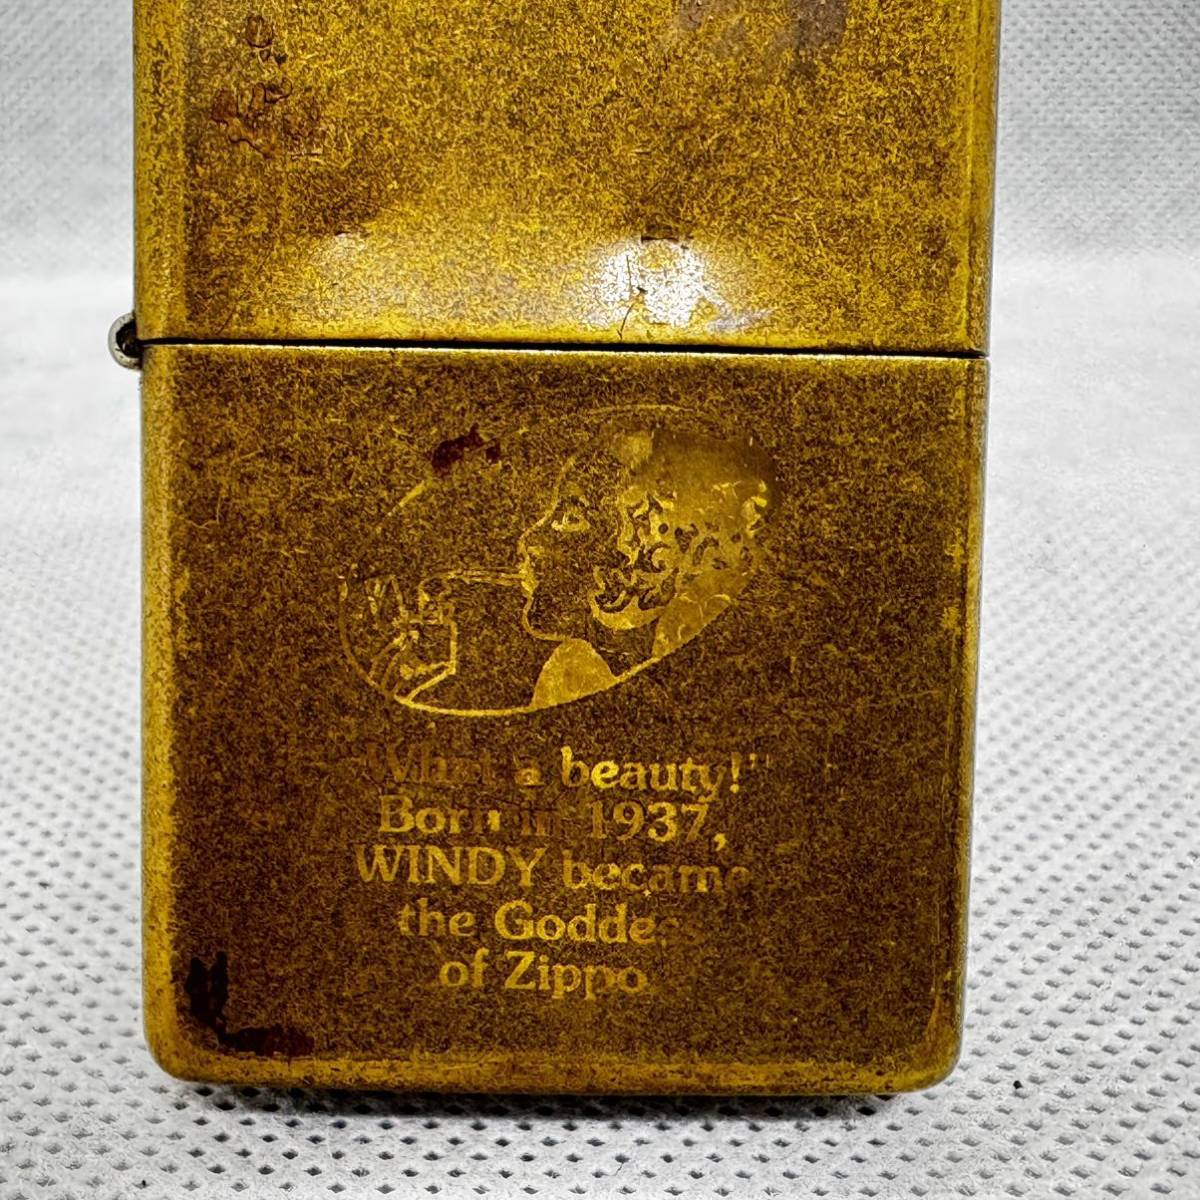 2437 ZIPPO ジッポ WINDY What a beauty! Born in 1937. WINDY become the Goddess of ZIPPO 1994年7月製造 ヴィンテージ　ライター _画像2